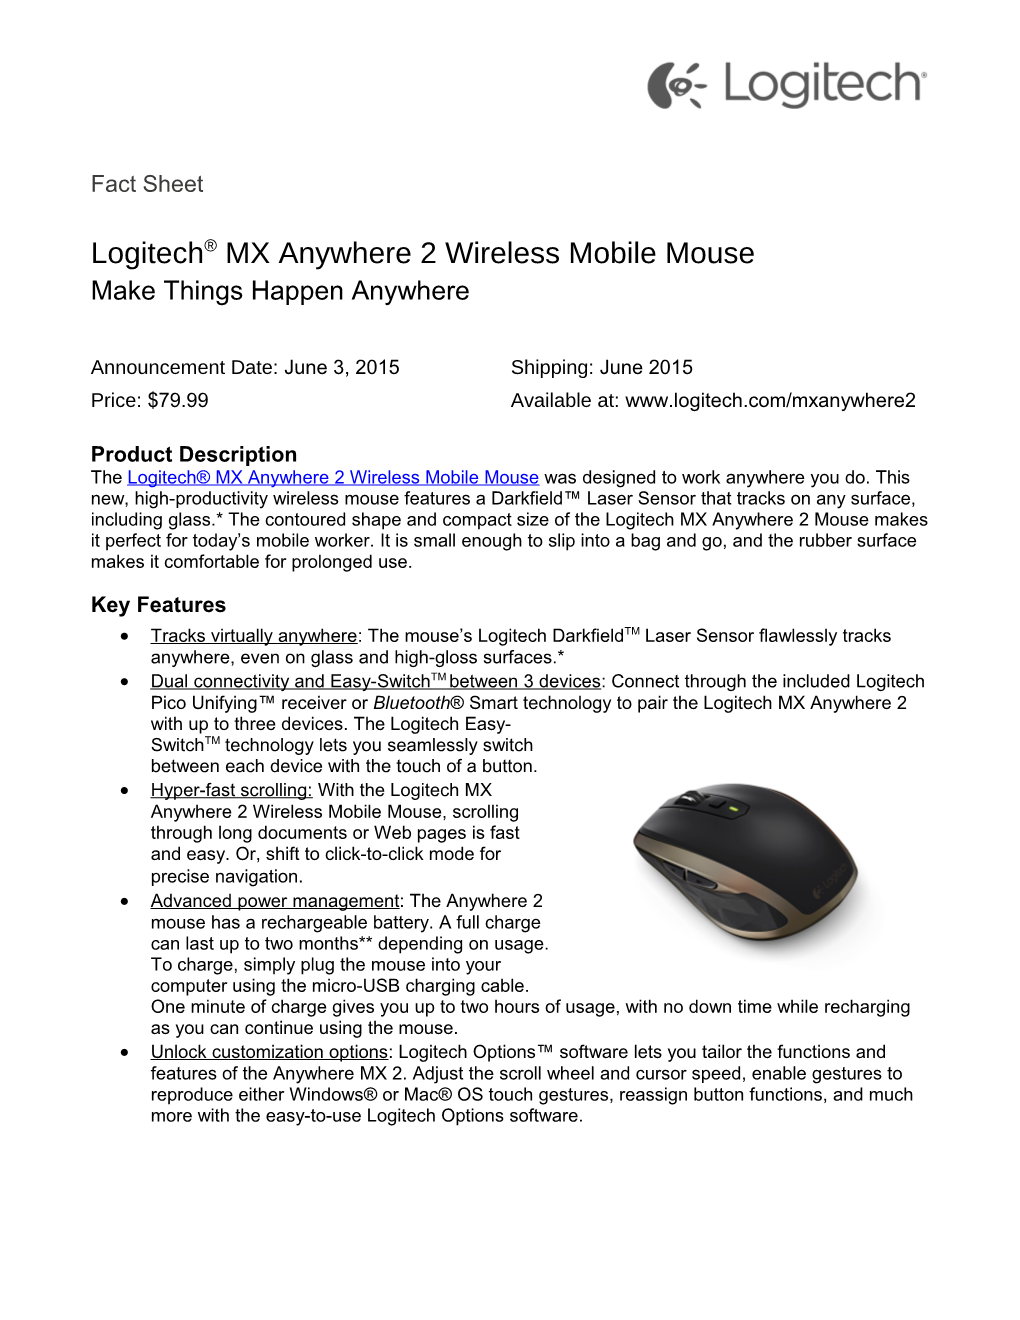 Logitech MX Anywhere 2 Wireless Mobile Mouse Fact Sheet Page 1